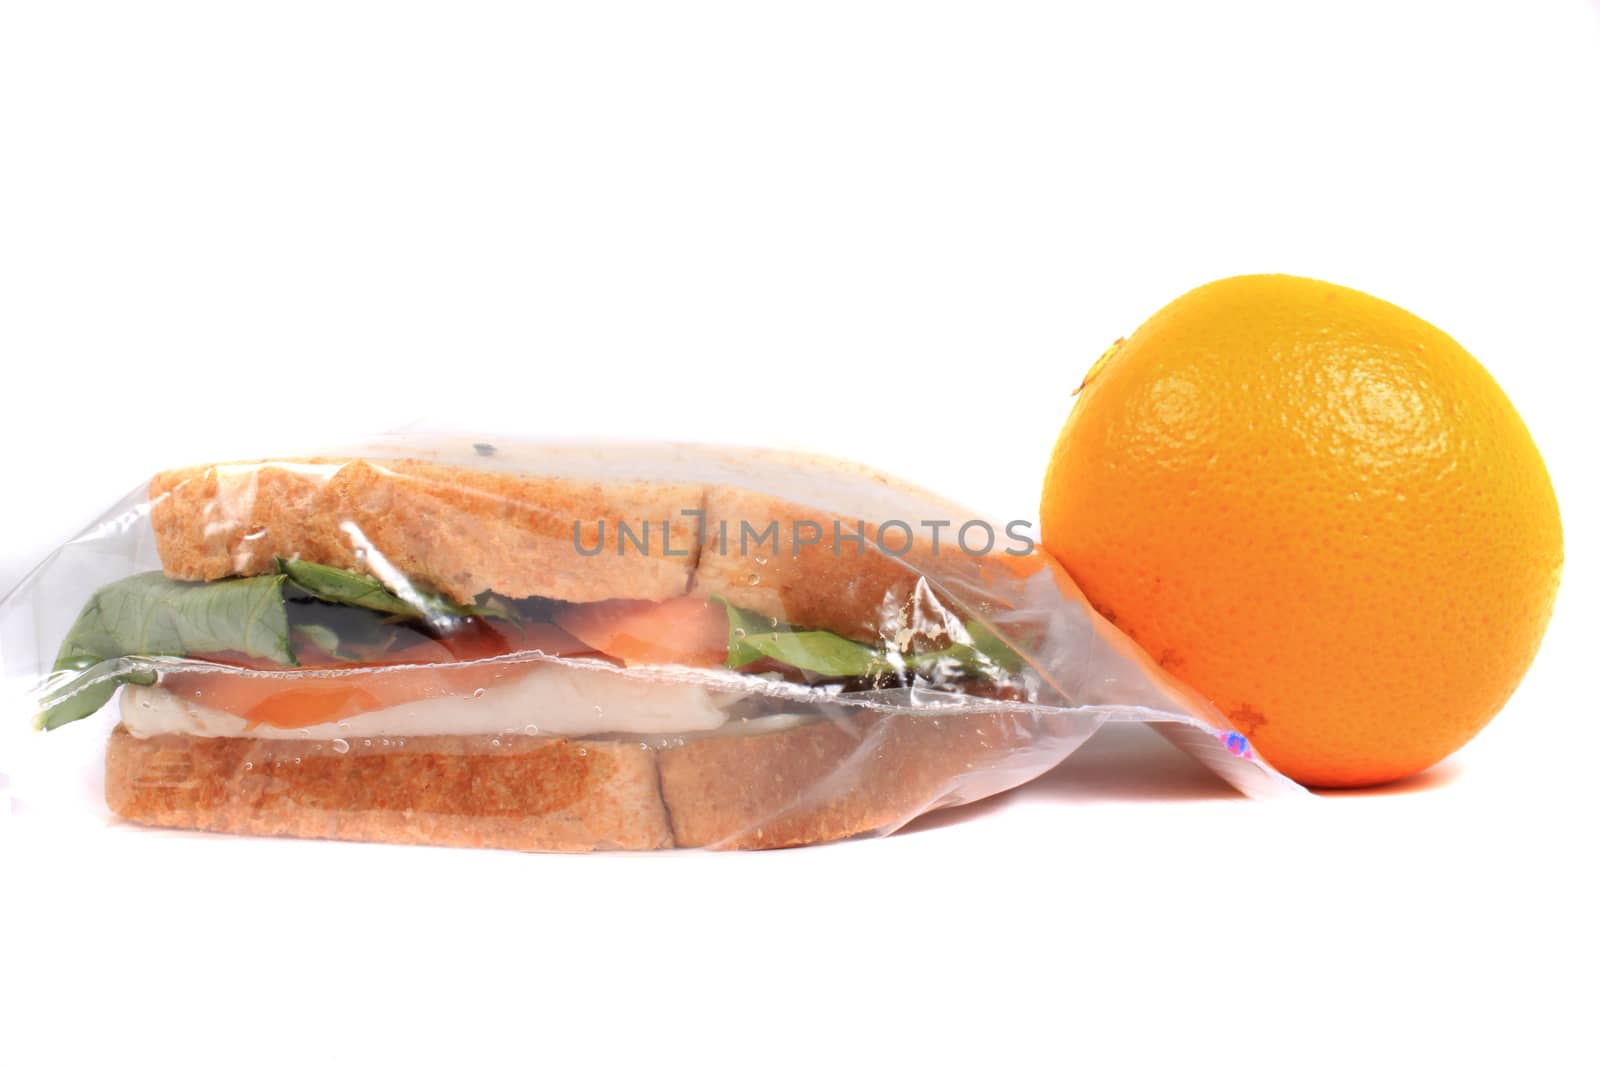 Turkey and cheese sandwich on whole wheat bread with tomato and lettuce inside a zipped bag ready for lunch and orange on the side